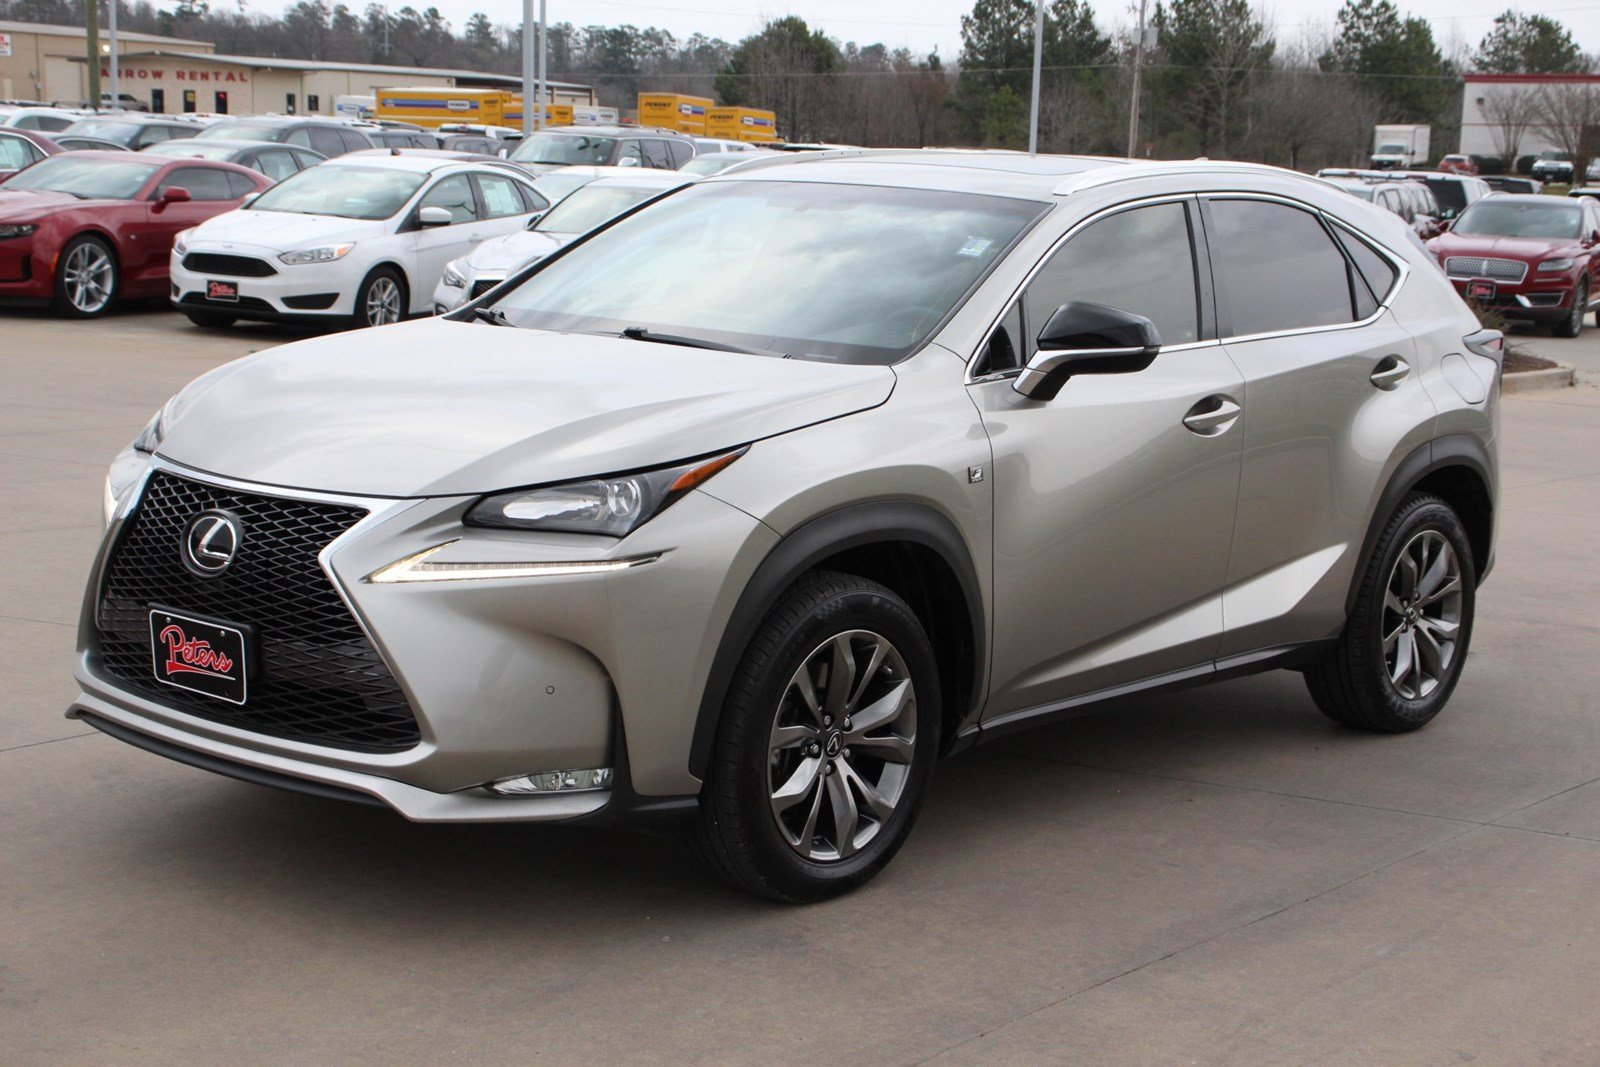 PreOwned 2015 Lexus NX 200t SUV in Longview A4116